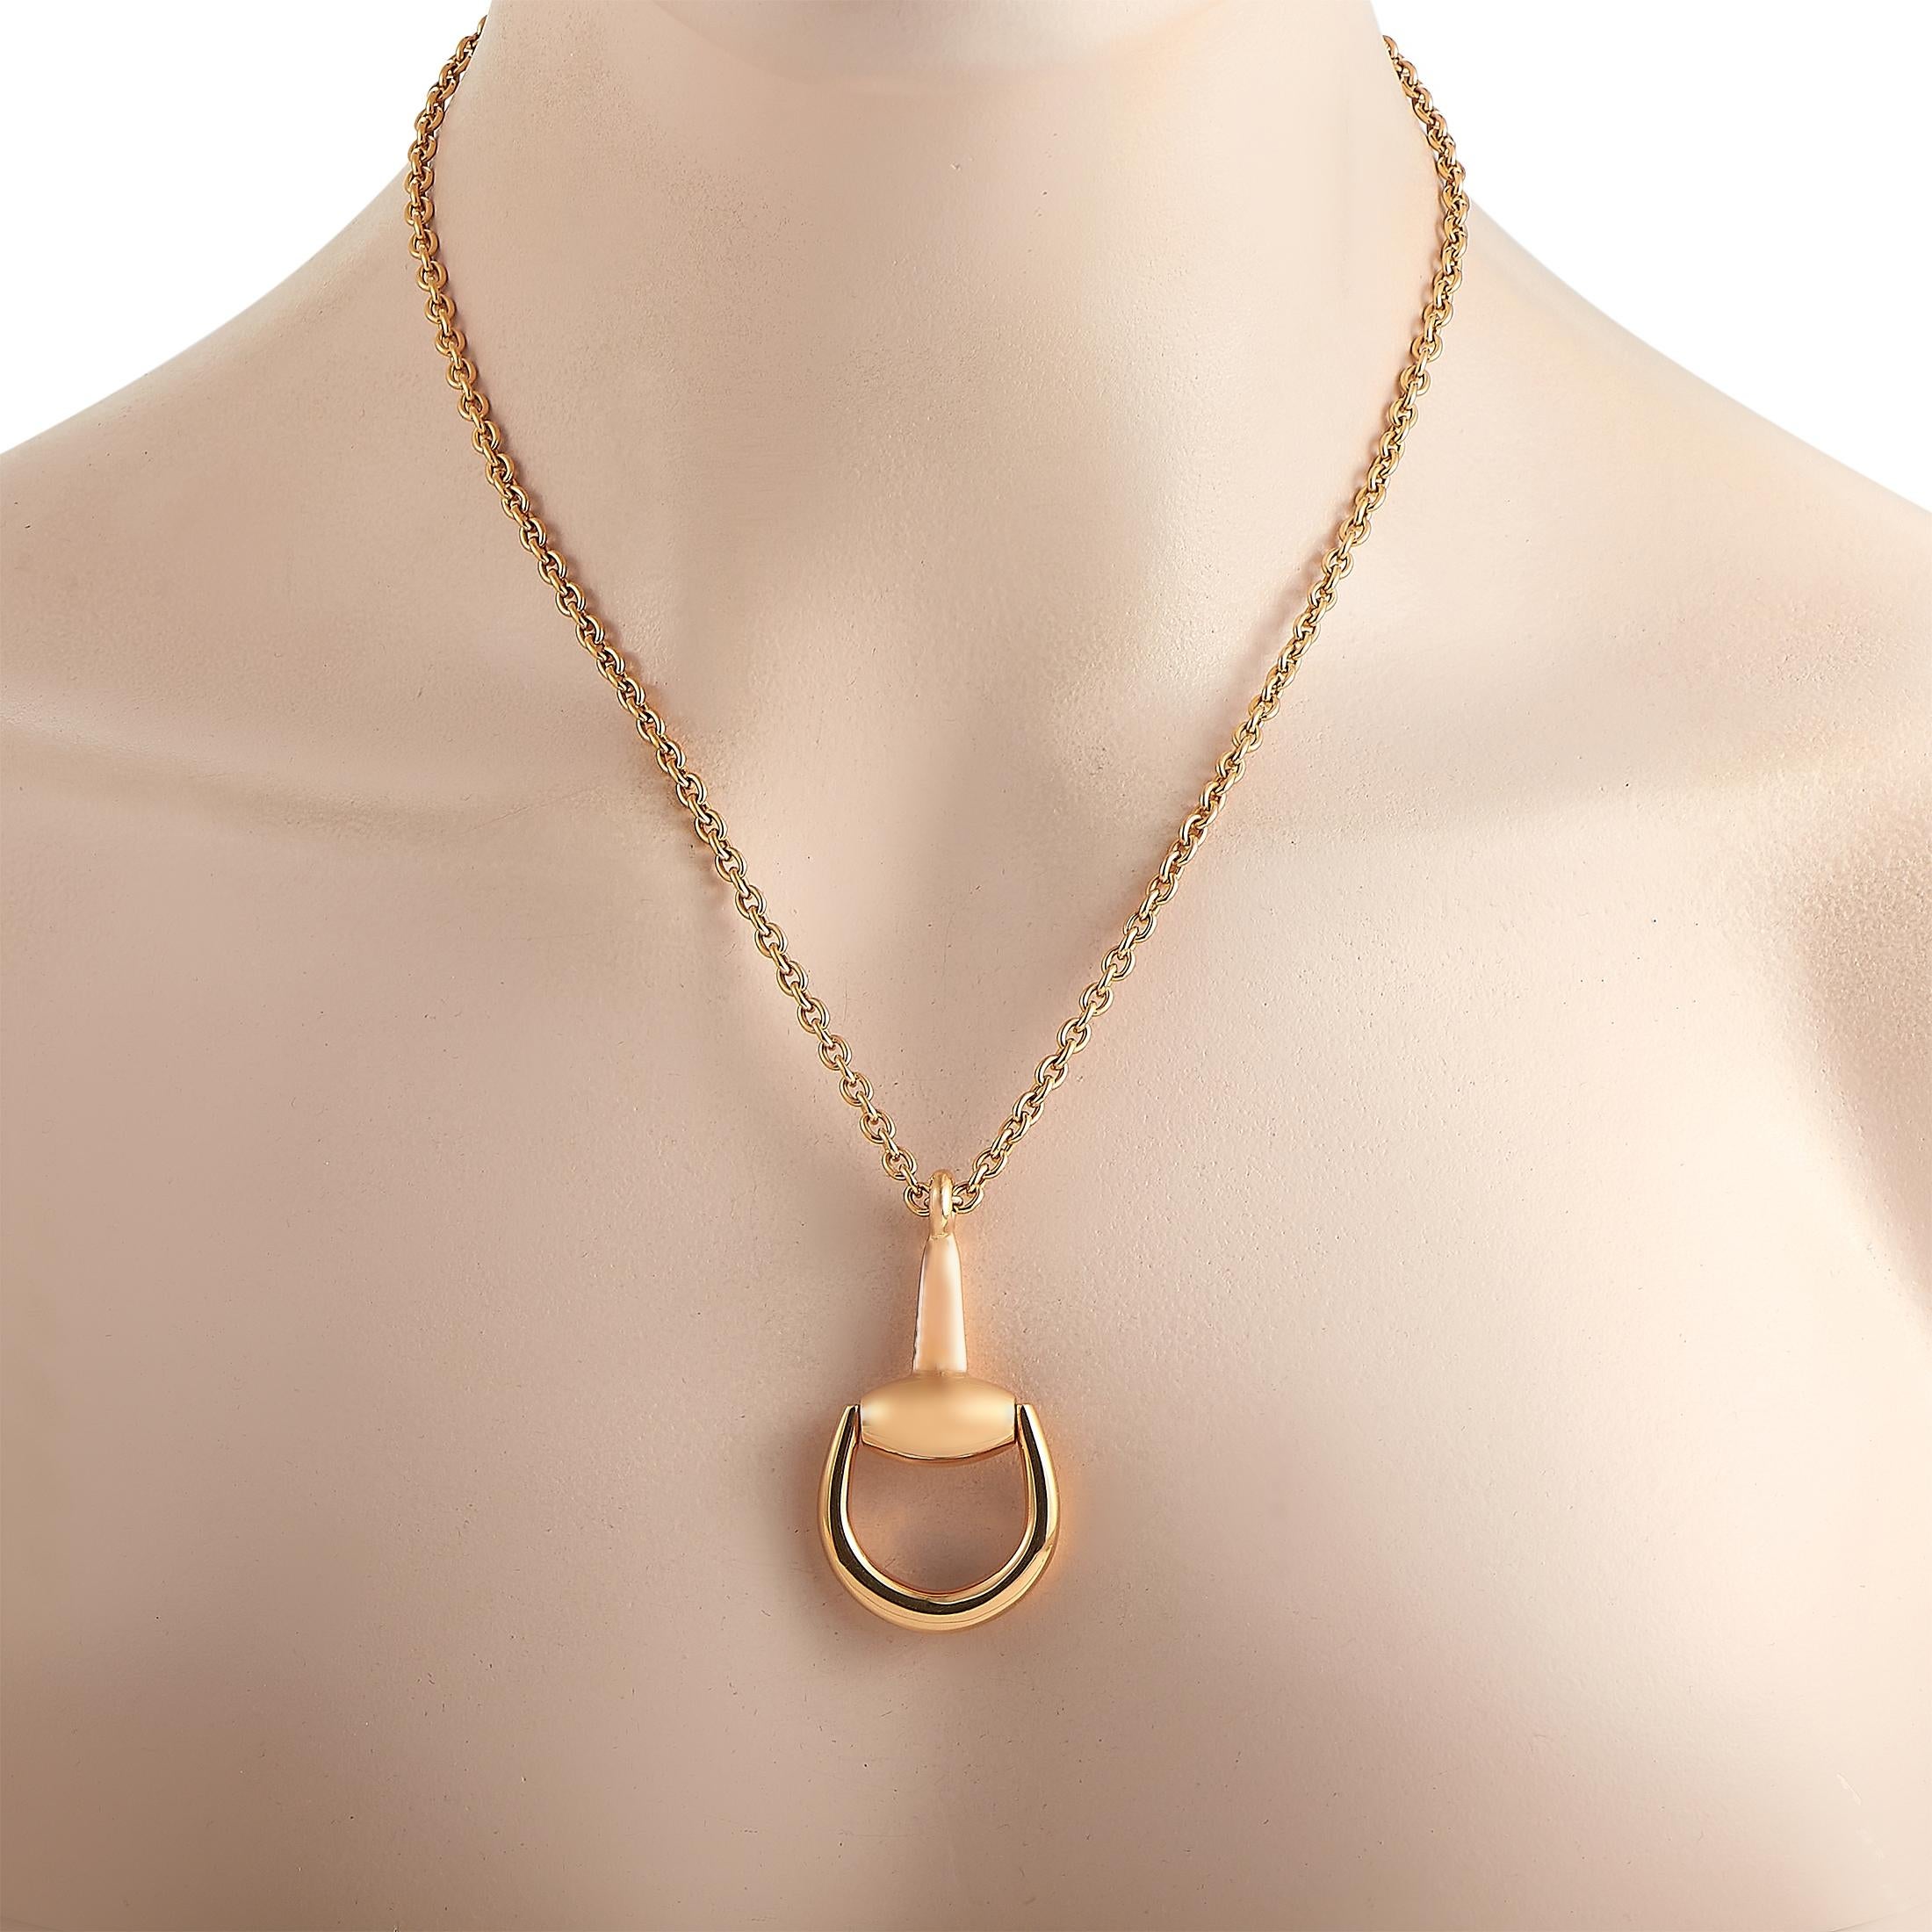 This Gucci Horsebit necklace is one of their signature pieces. The chain and pendant are crafted from 18K rose gold, and the pendant measures 2 inches by 1.15 inches while the chain measures 32 inches in length. The necklace weighs a total of 22.6